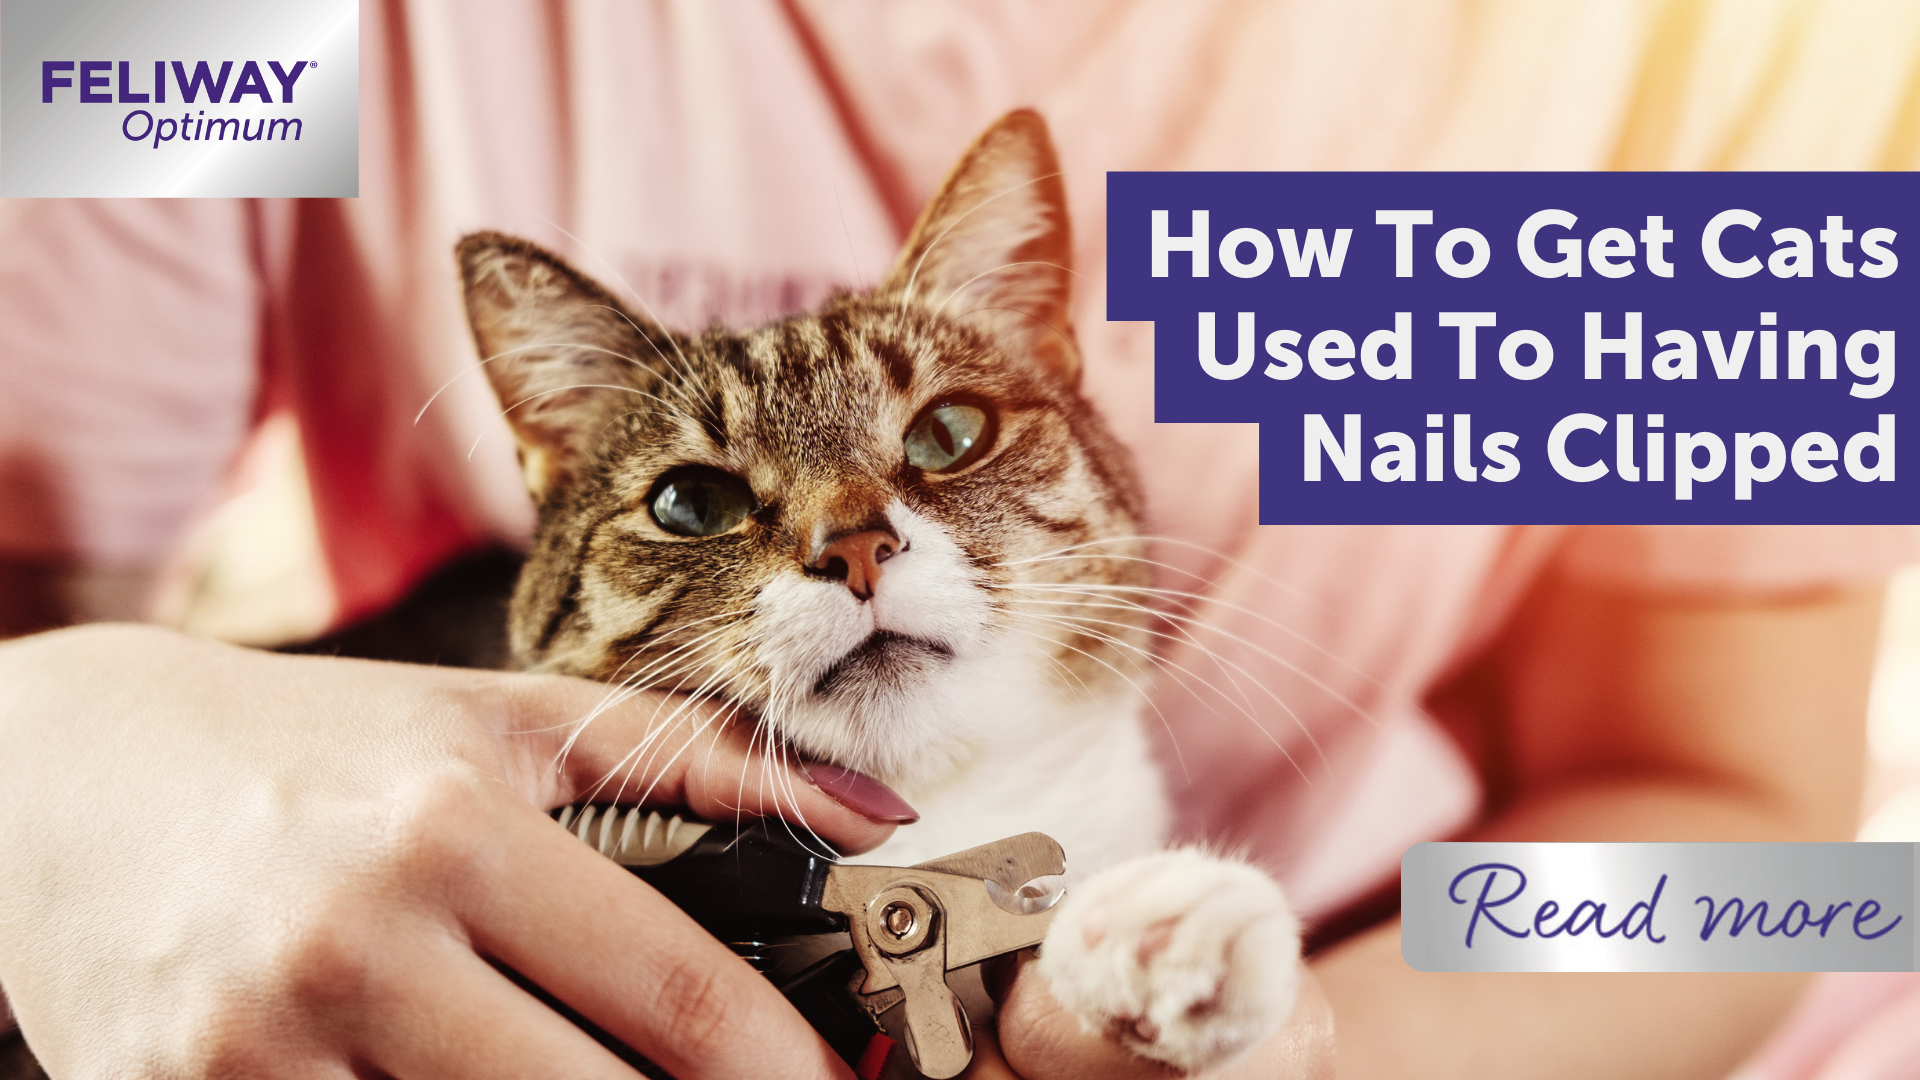 How to get cats used to having nails clipped